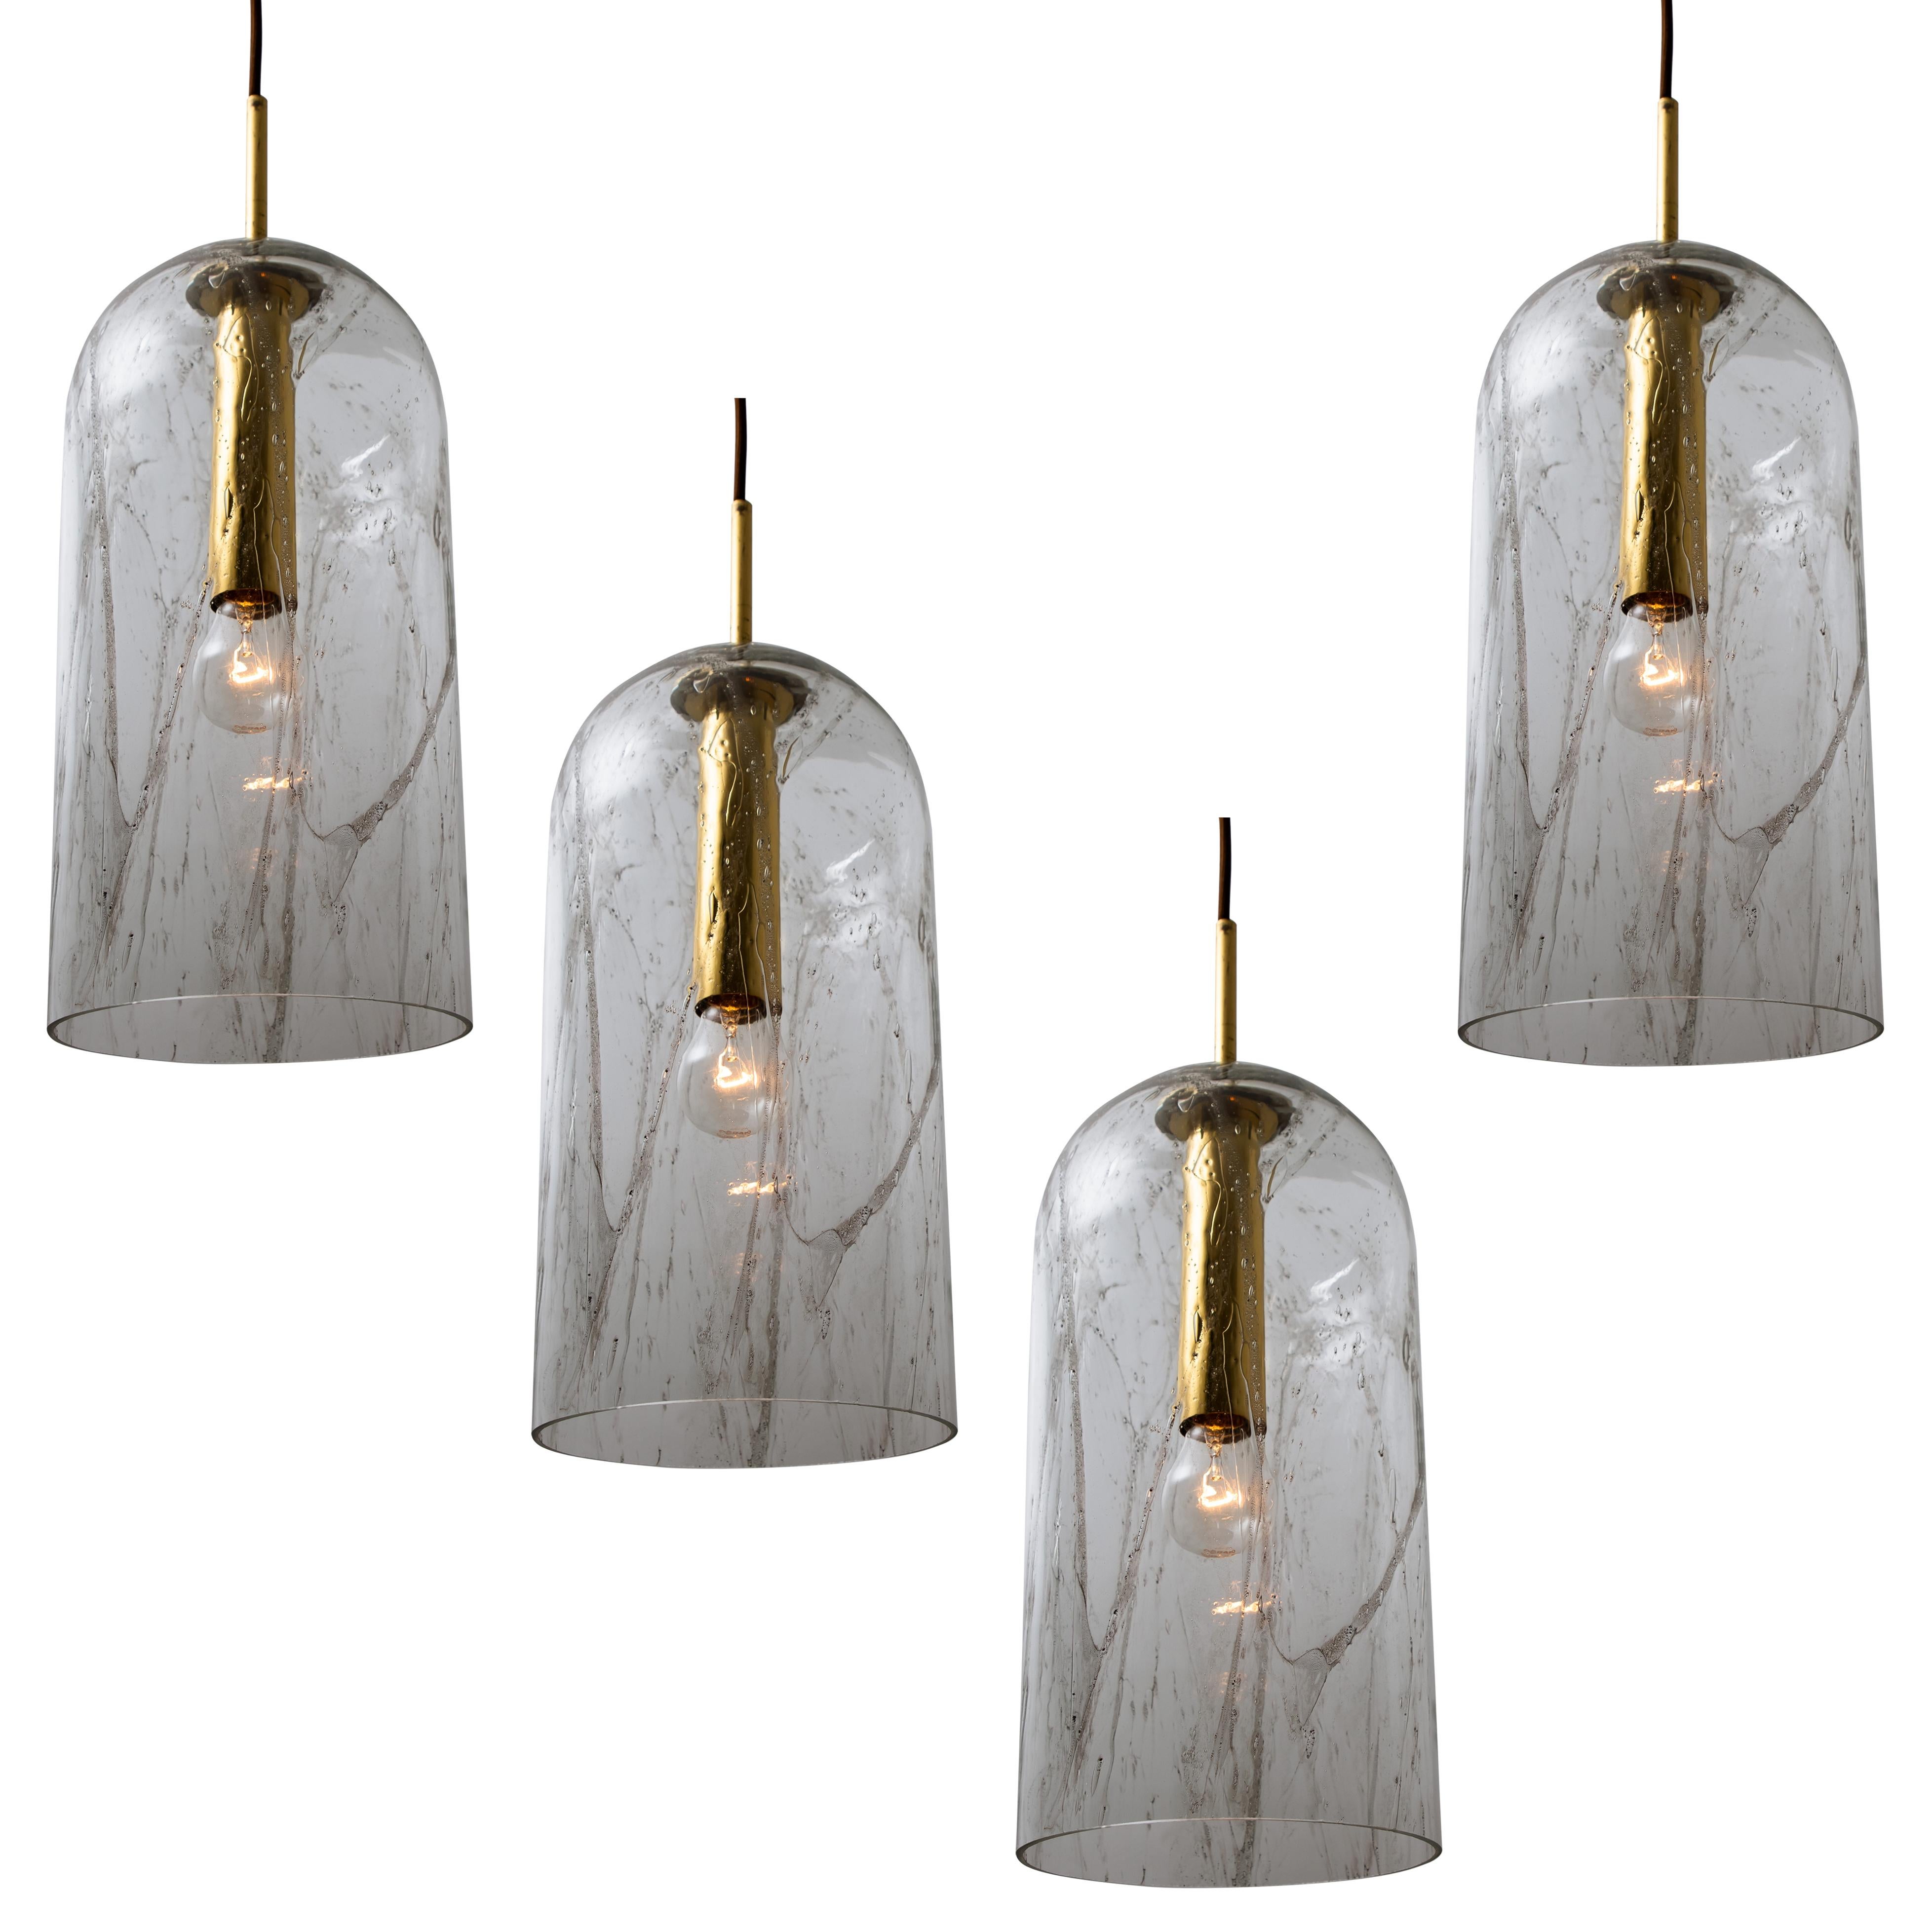 1 of the 3 Glass Pendant Lamps by Doria, 1960 For Sale 8